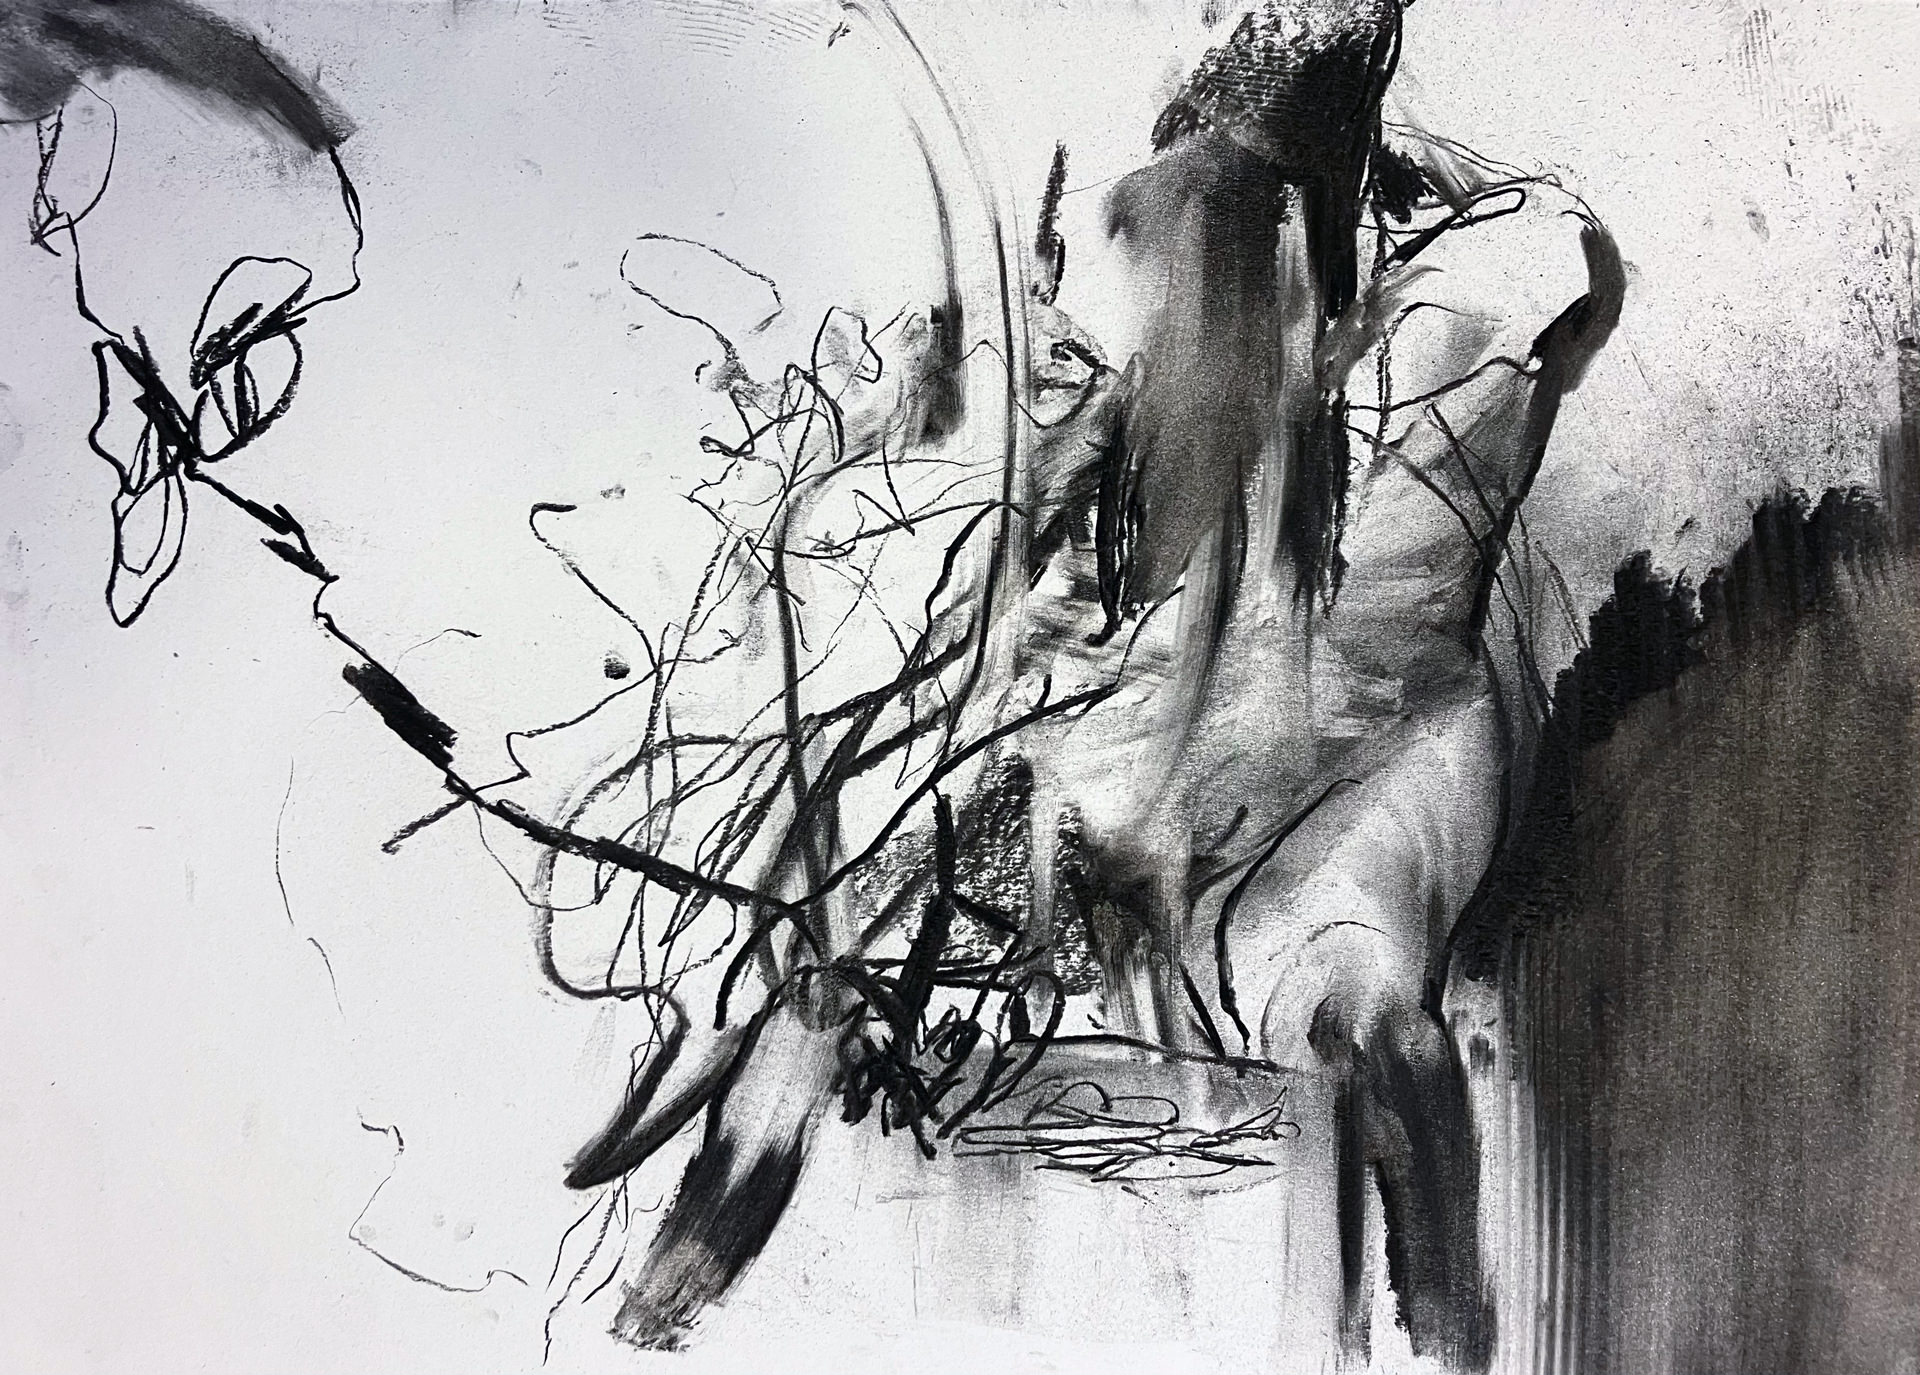 Charcoal drawing, anatomy and abstract study